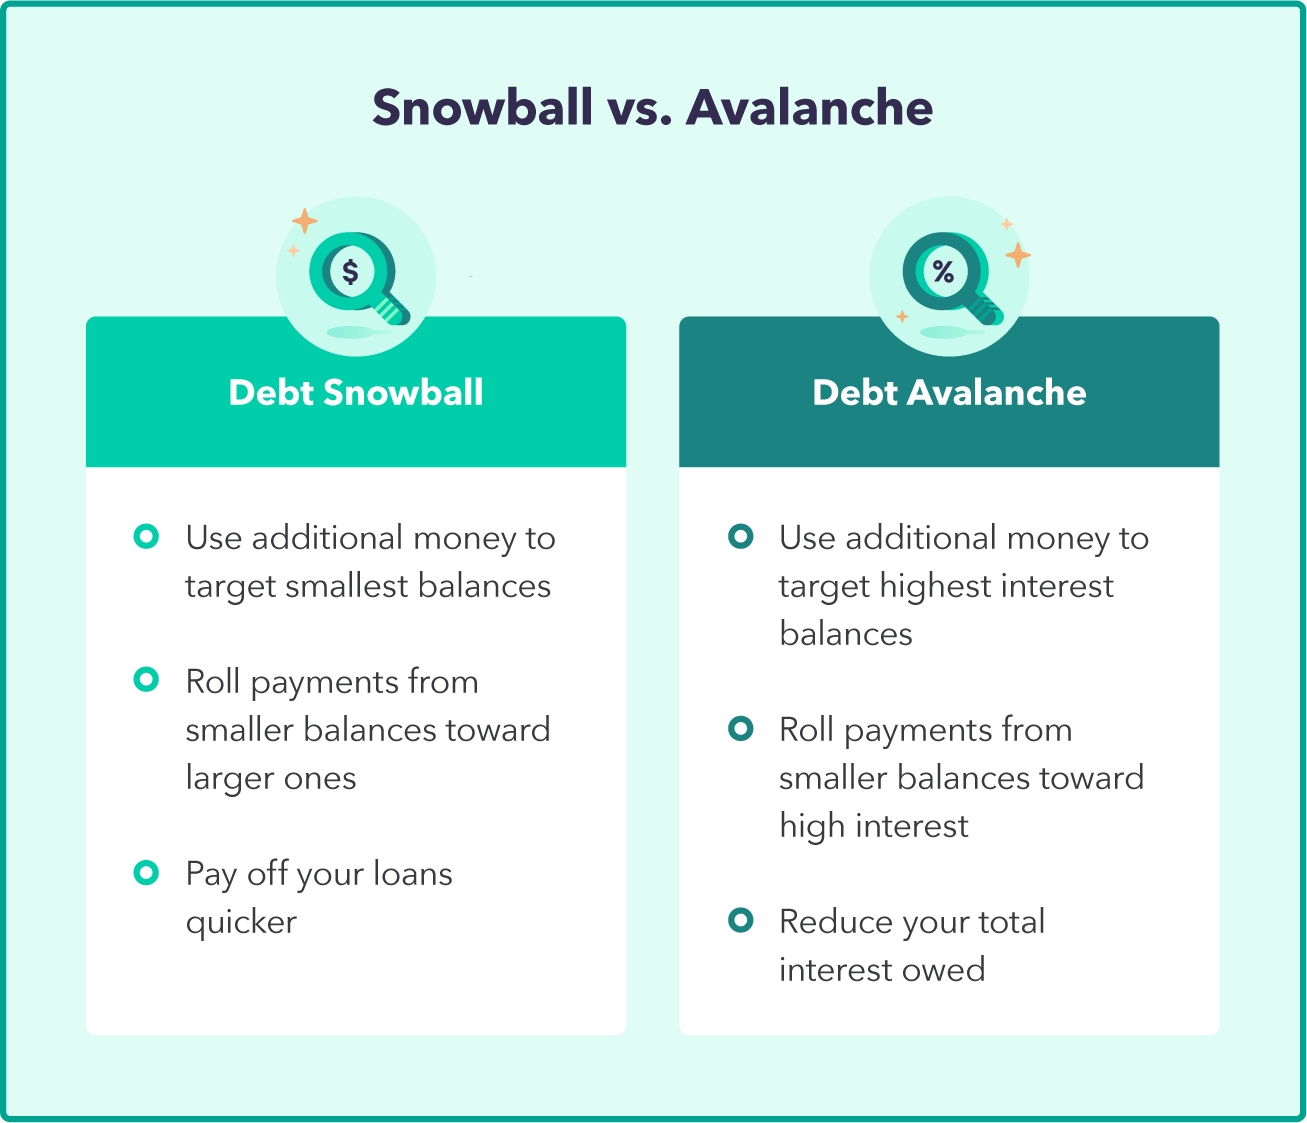 A graphic overviews the difference between the debt snowball method and debt avalanche method, as part of a debt snowball calculator. Some of those main differences include that the debt snow ball uses additional money to target small balances to the debt avalanche uses additional money to target higher interest balances. Included text: Snowball vs. Avalanche S ( % + Debt Snowball Debt Avalanche Use additional money to target smallest balances © Roll payments from smaller balances toward larger ones O Pay off your loans quicker Use additional money to target highest interest balances © Roll payments from smaller balances toward high interest O Reduce your total interest owed